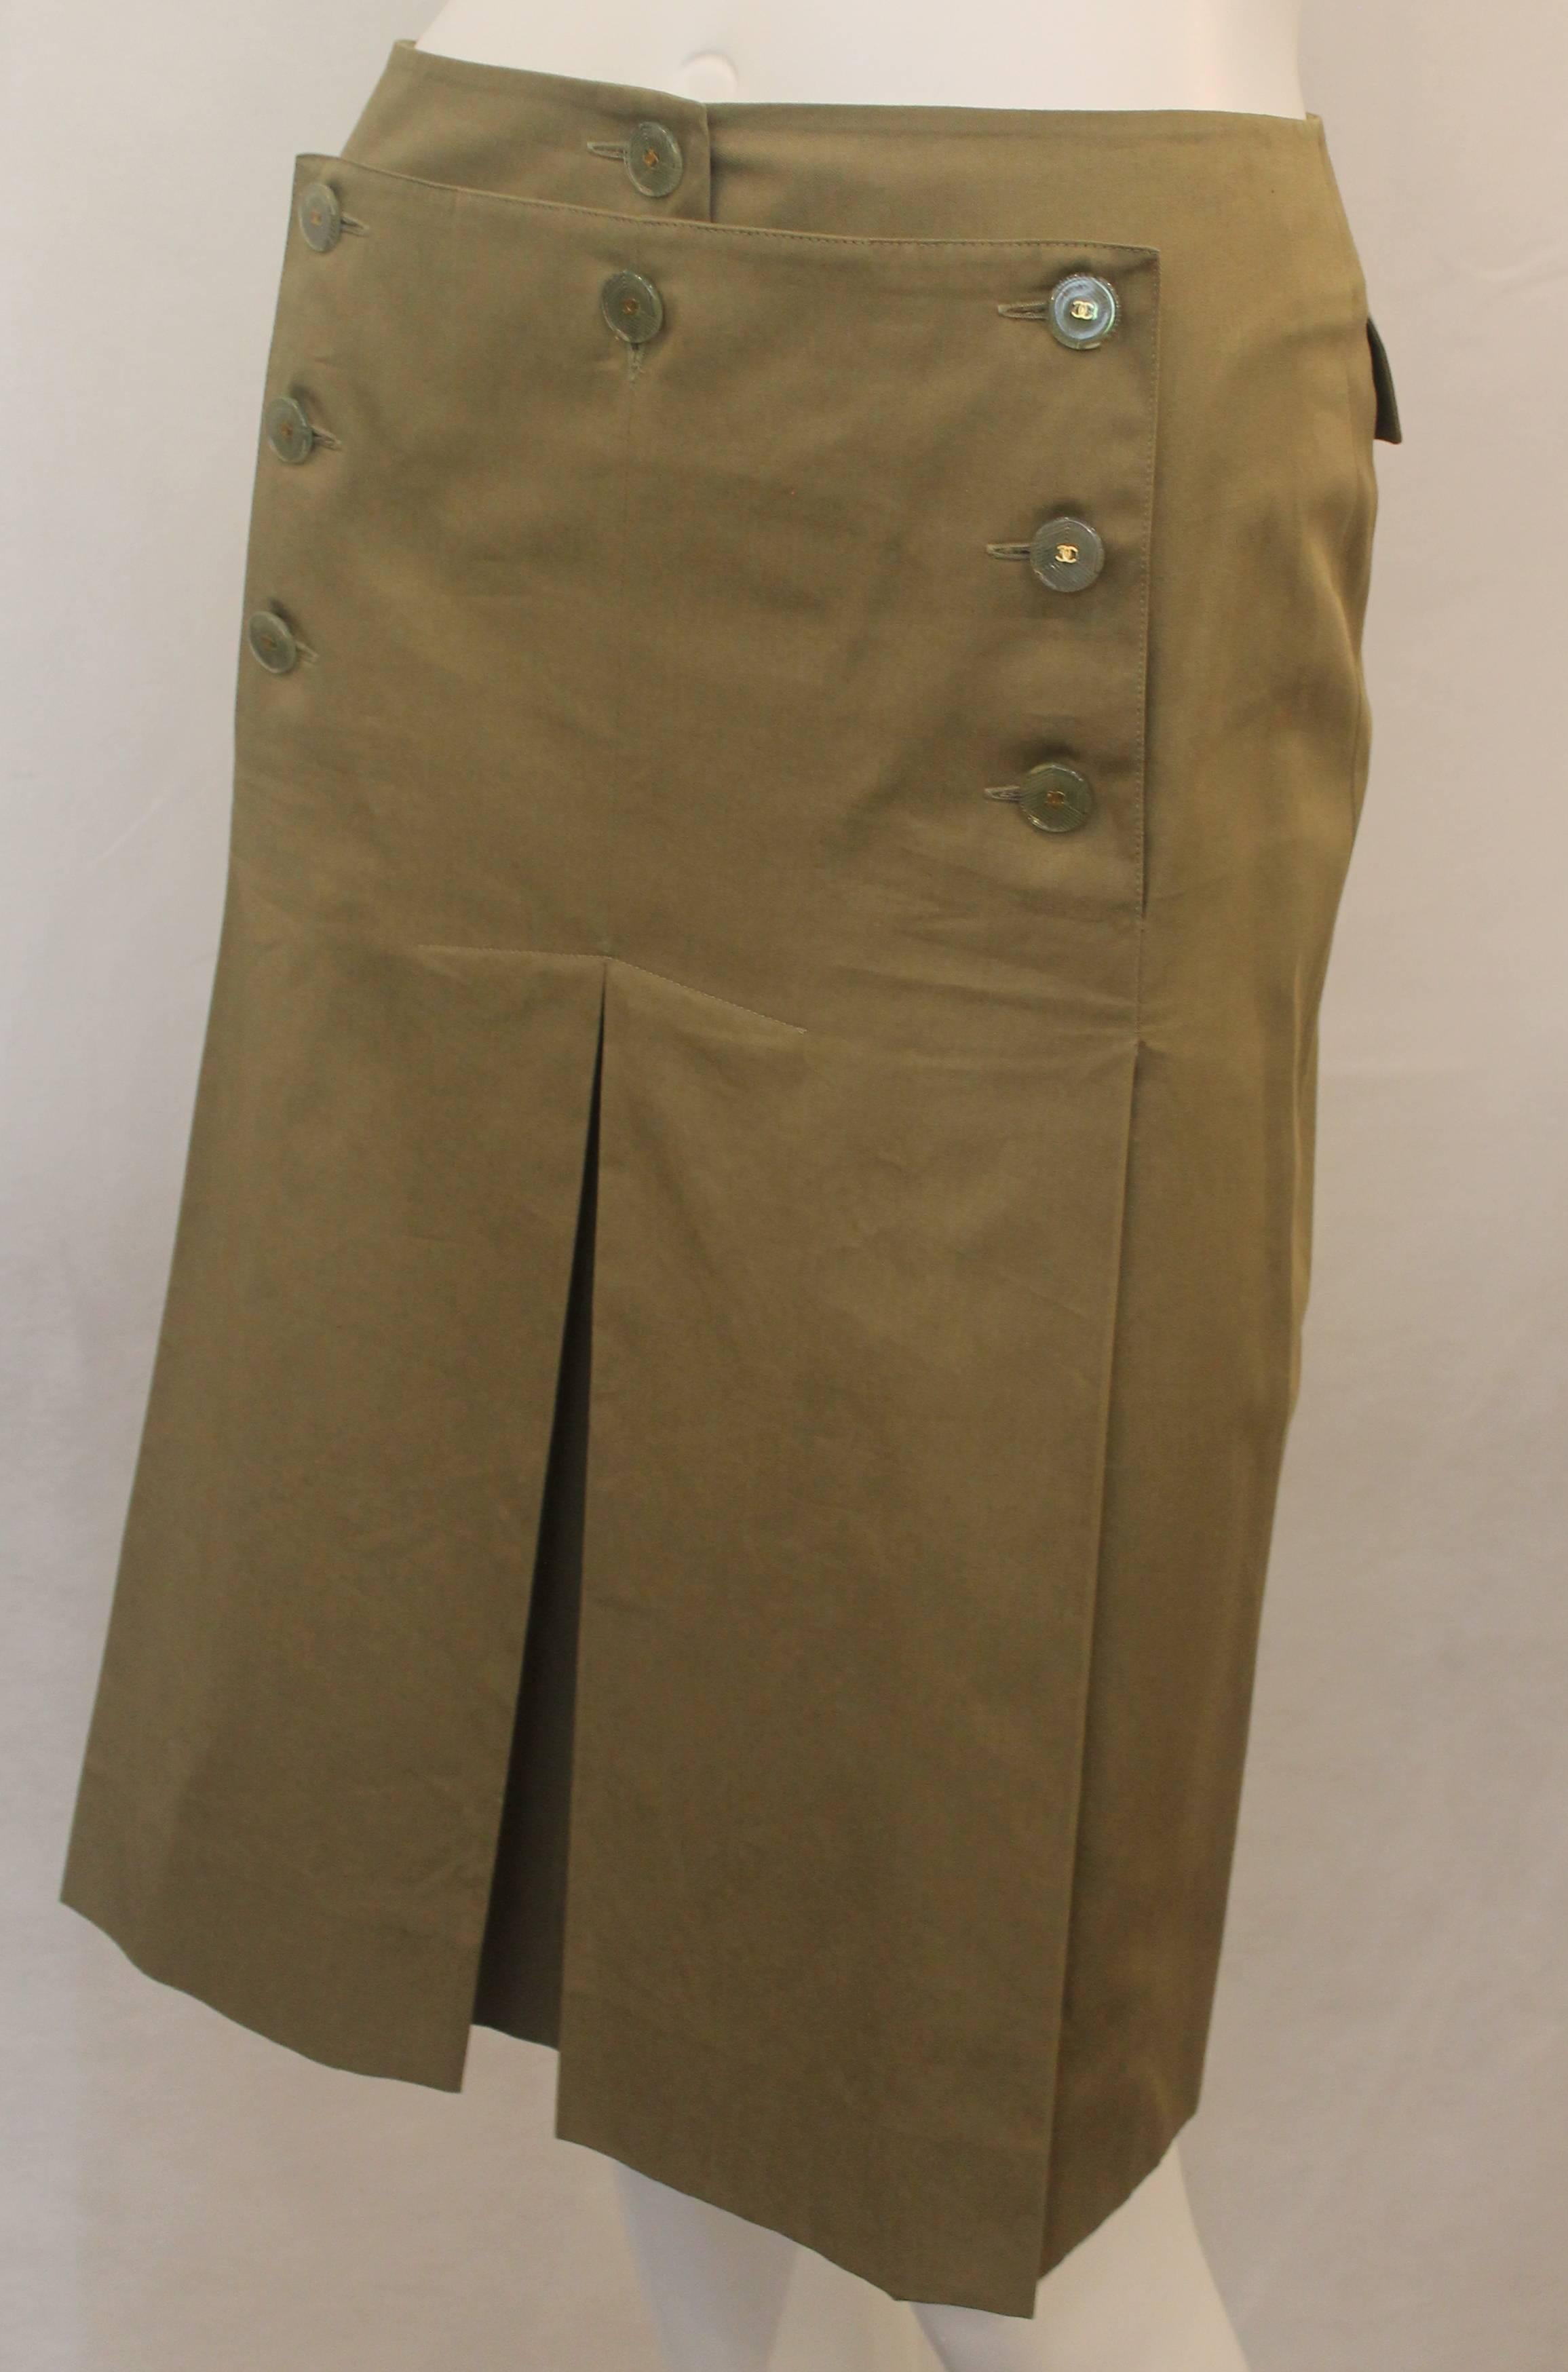 Chanel Olive Skirt with Pleating and Lucite Buttons - 36 - 02 P. This beautiful skirt is green with pleating. There are 2 big front pleats and 2 pockets in the back. The buttons are Lucite with a gold 